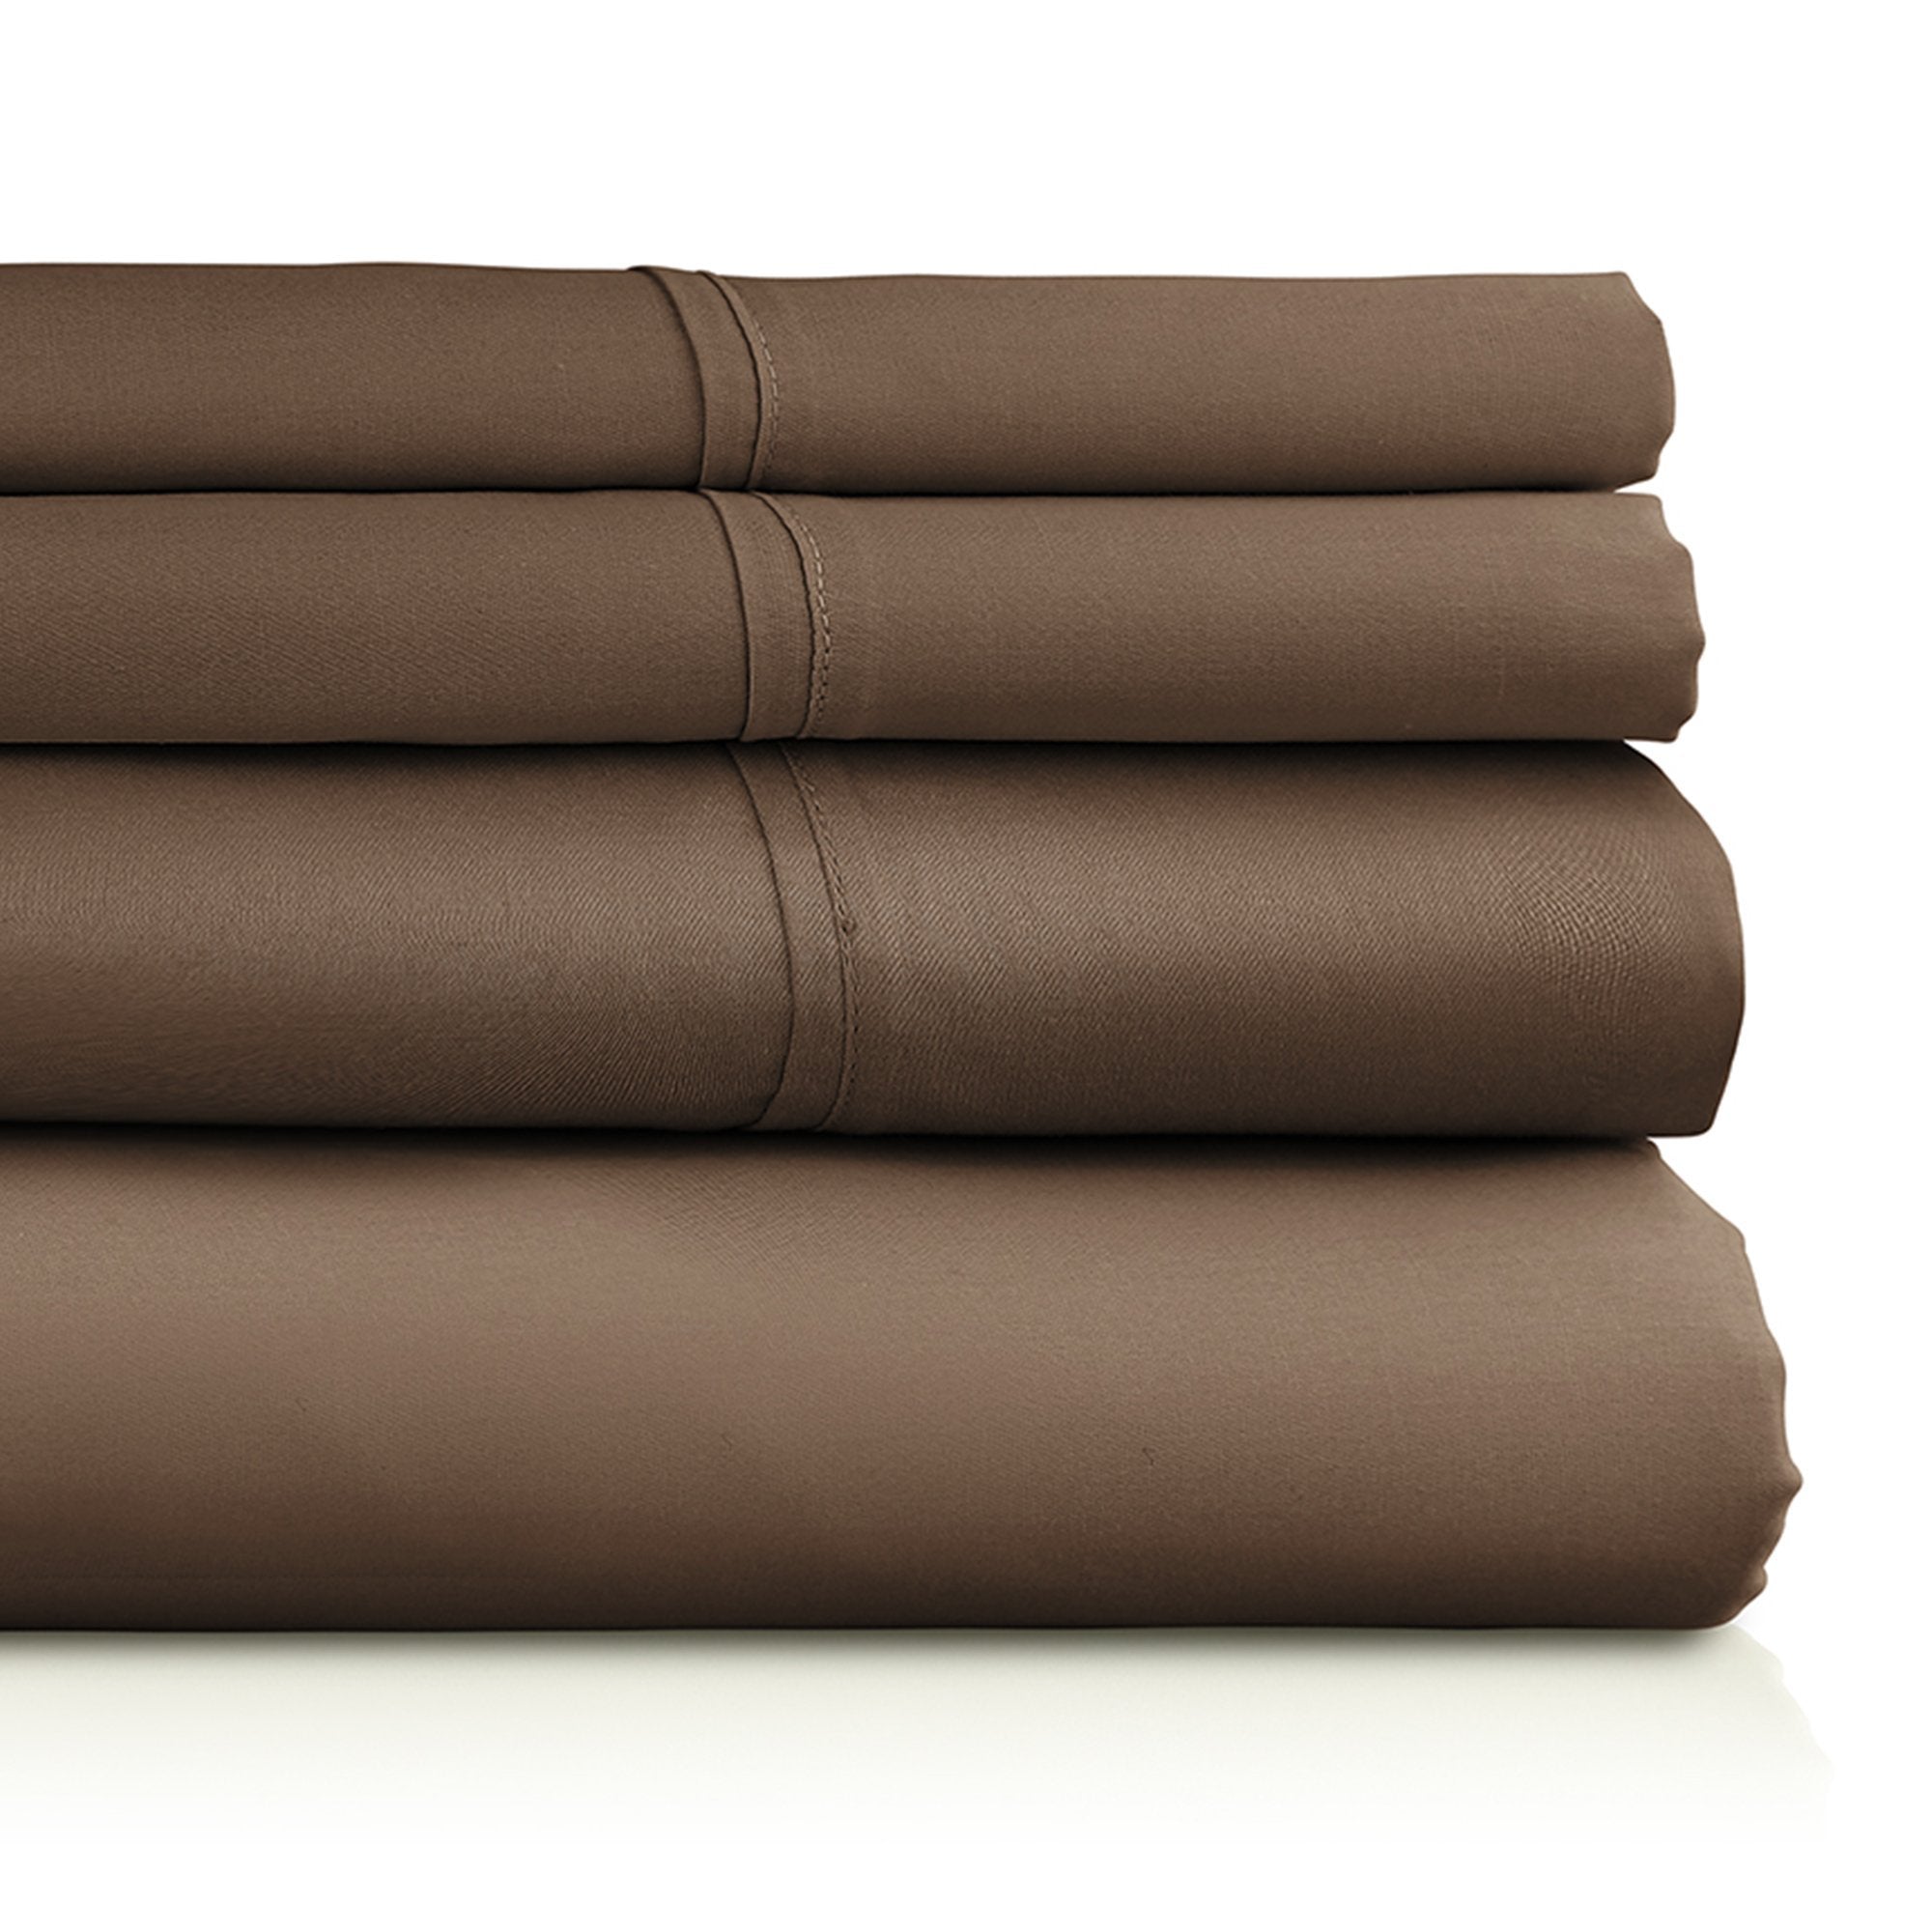 Martano 600 Thread Count Egyptian Cotton Solid Sheets - Luxor Linens 